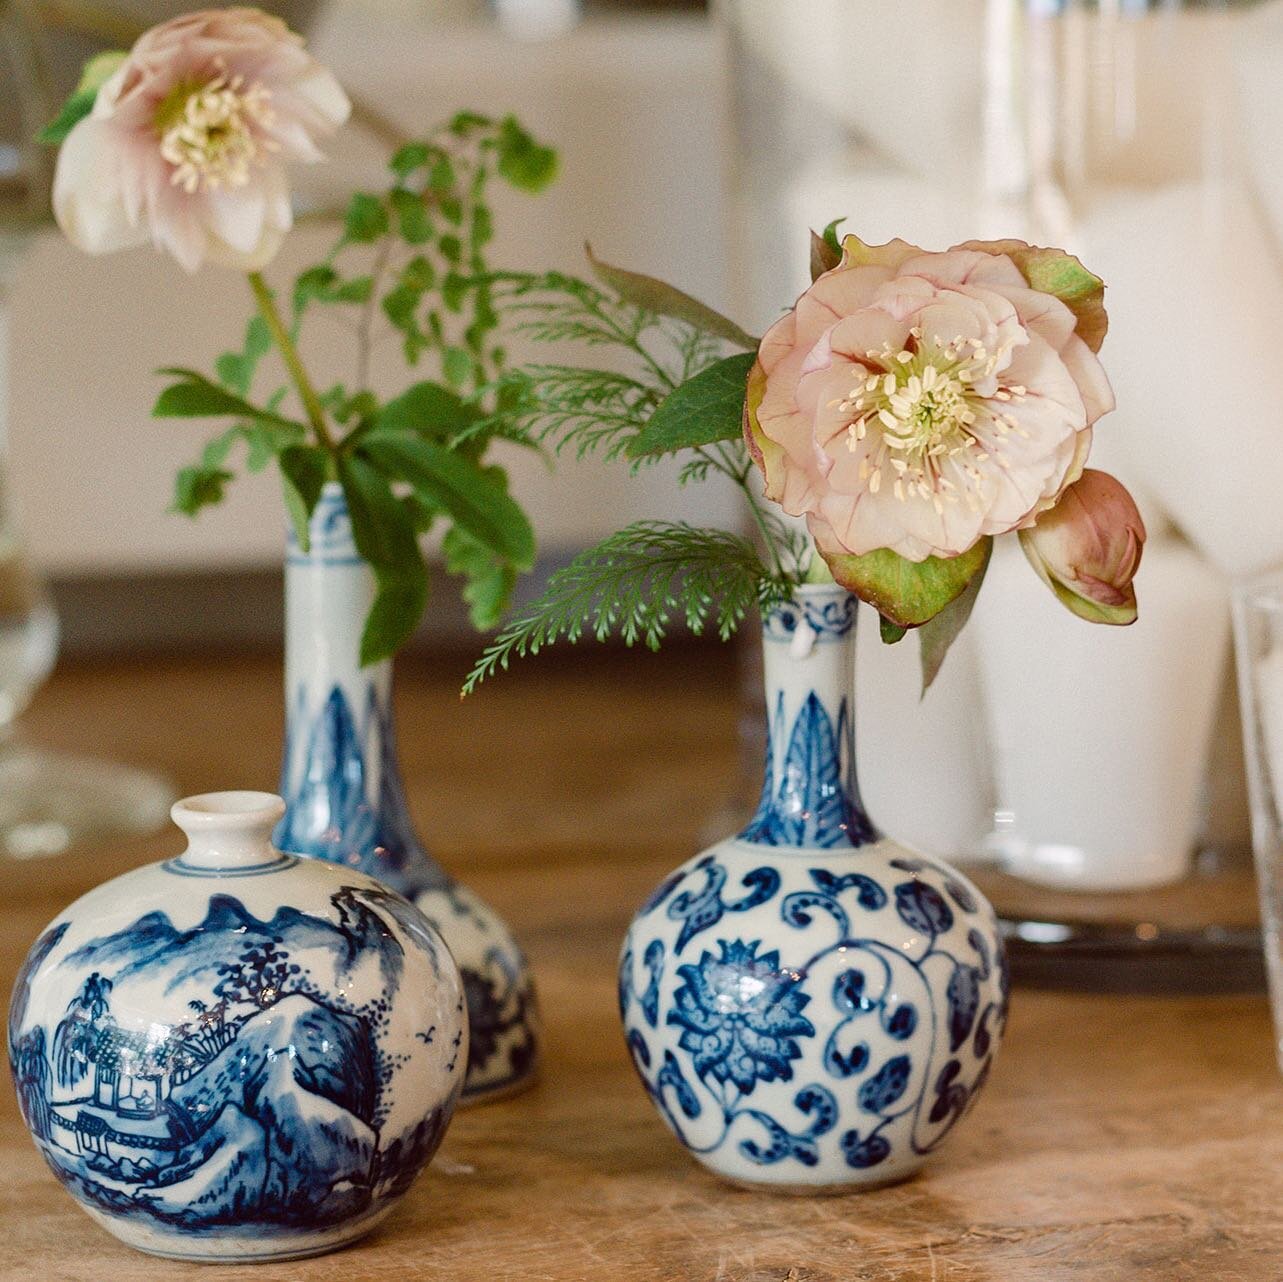 Little blue and white bud vases are simple and sweet, but make a big impact with just a few single stems from the garden. $35 each
Thank you for our lovely pic @kateprincephotography 🤍🤍🤍

#gardenerscottageasheville #gardenstyle #flowersofinstagram